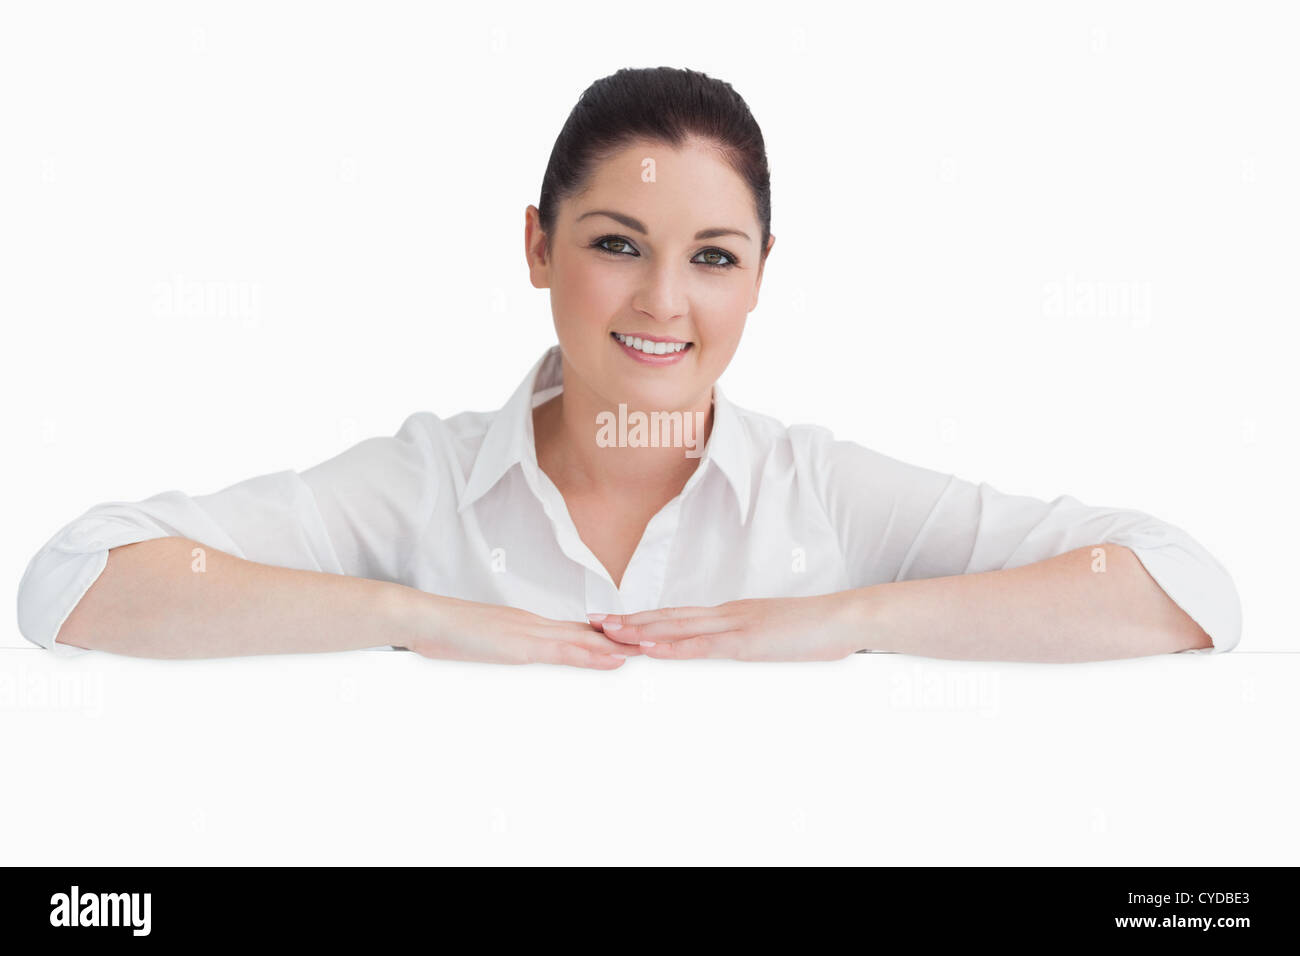 Smiling woman resting on arms Stock Photo